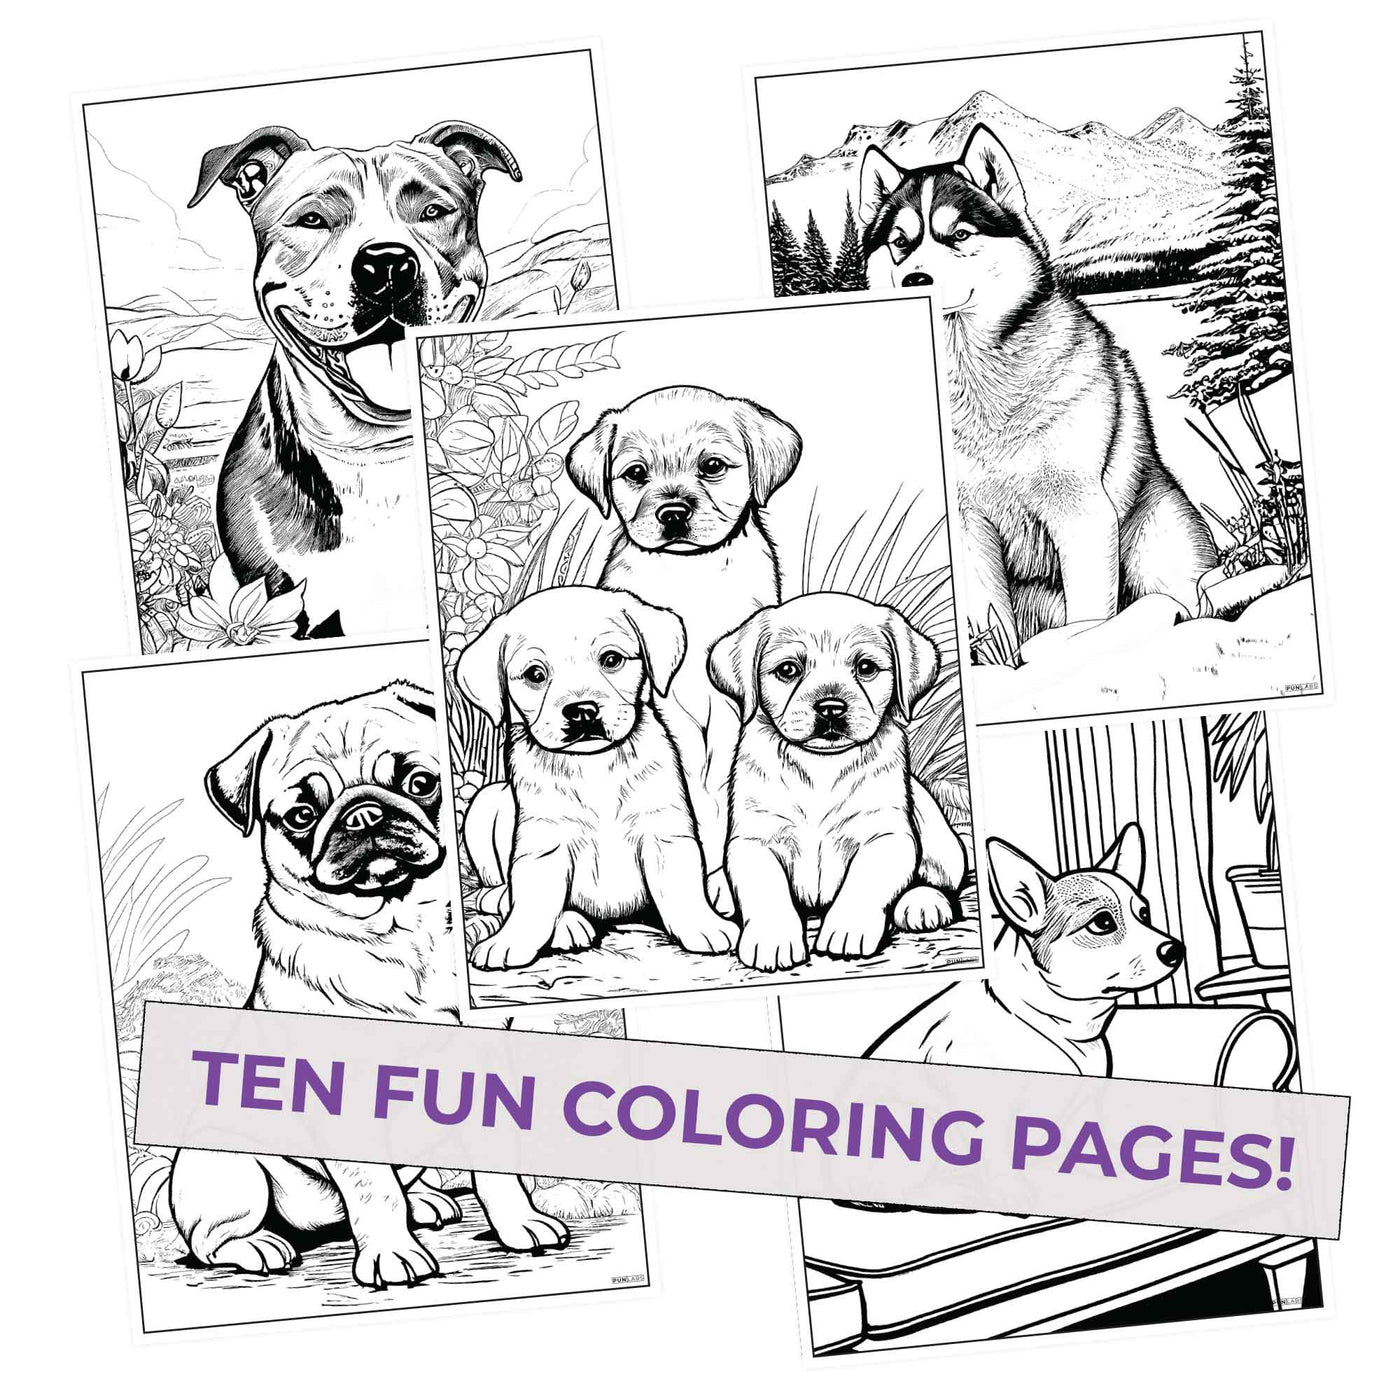 Dog themed coloring pages